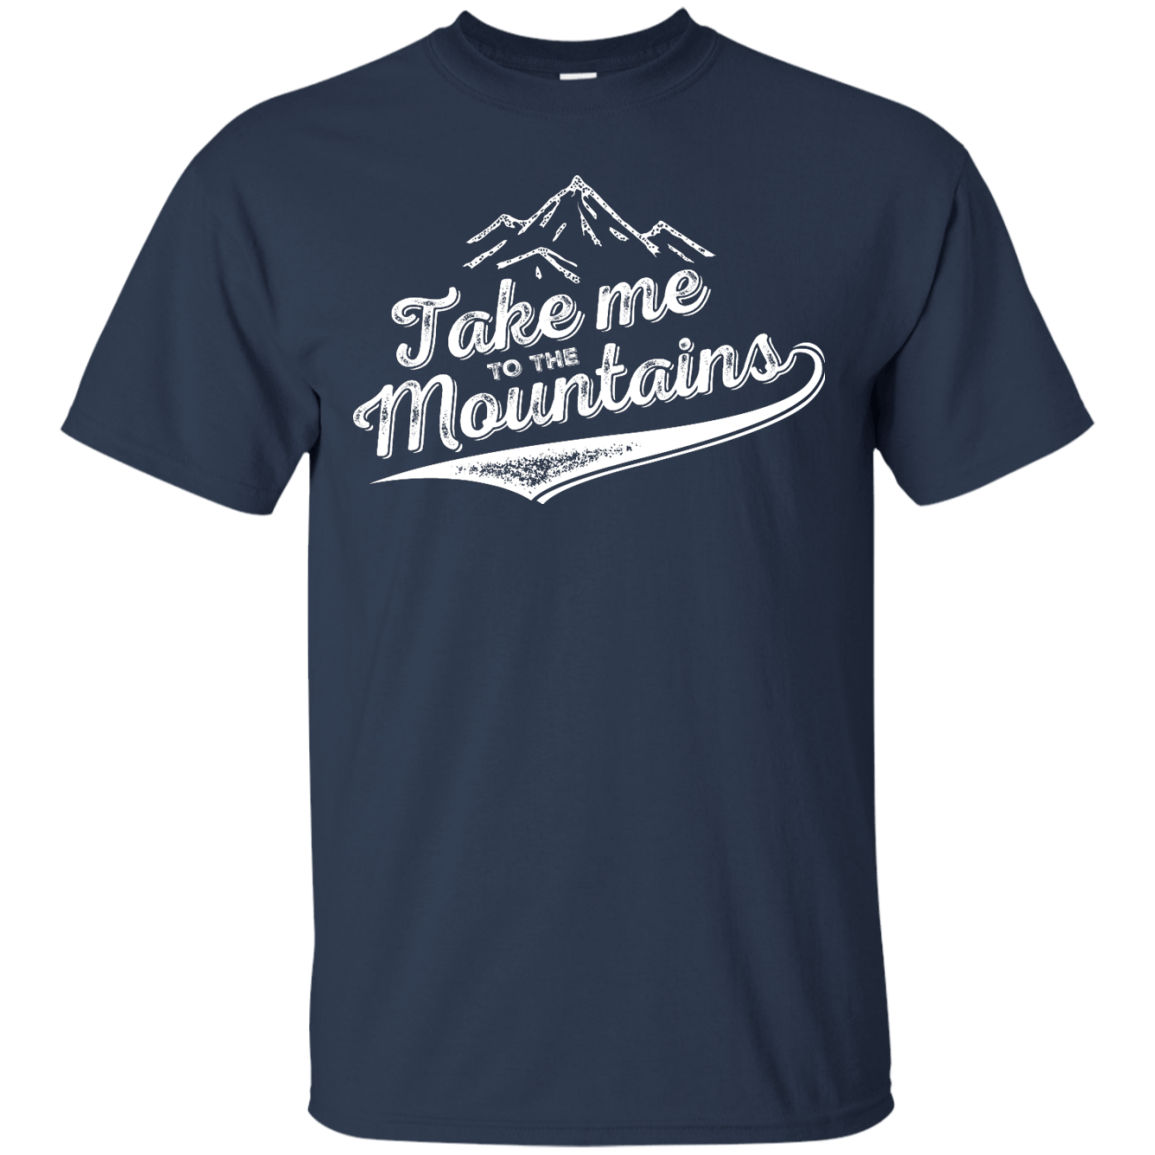 Take Me To The Mountains Men's Tees and V-Neck - Powderaddicts